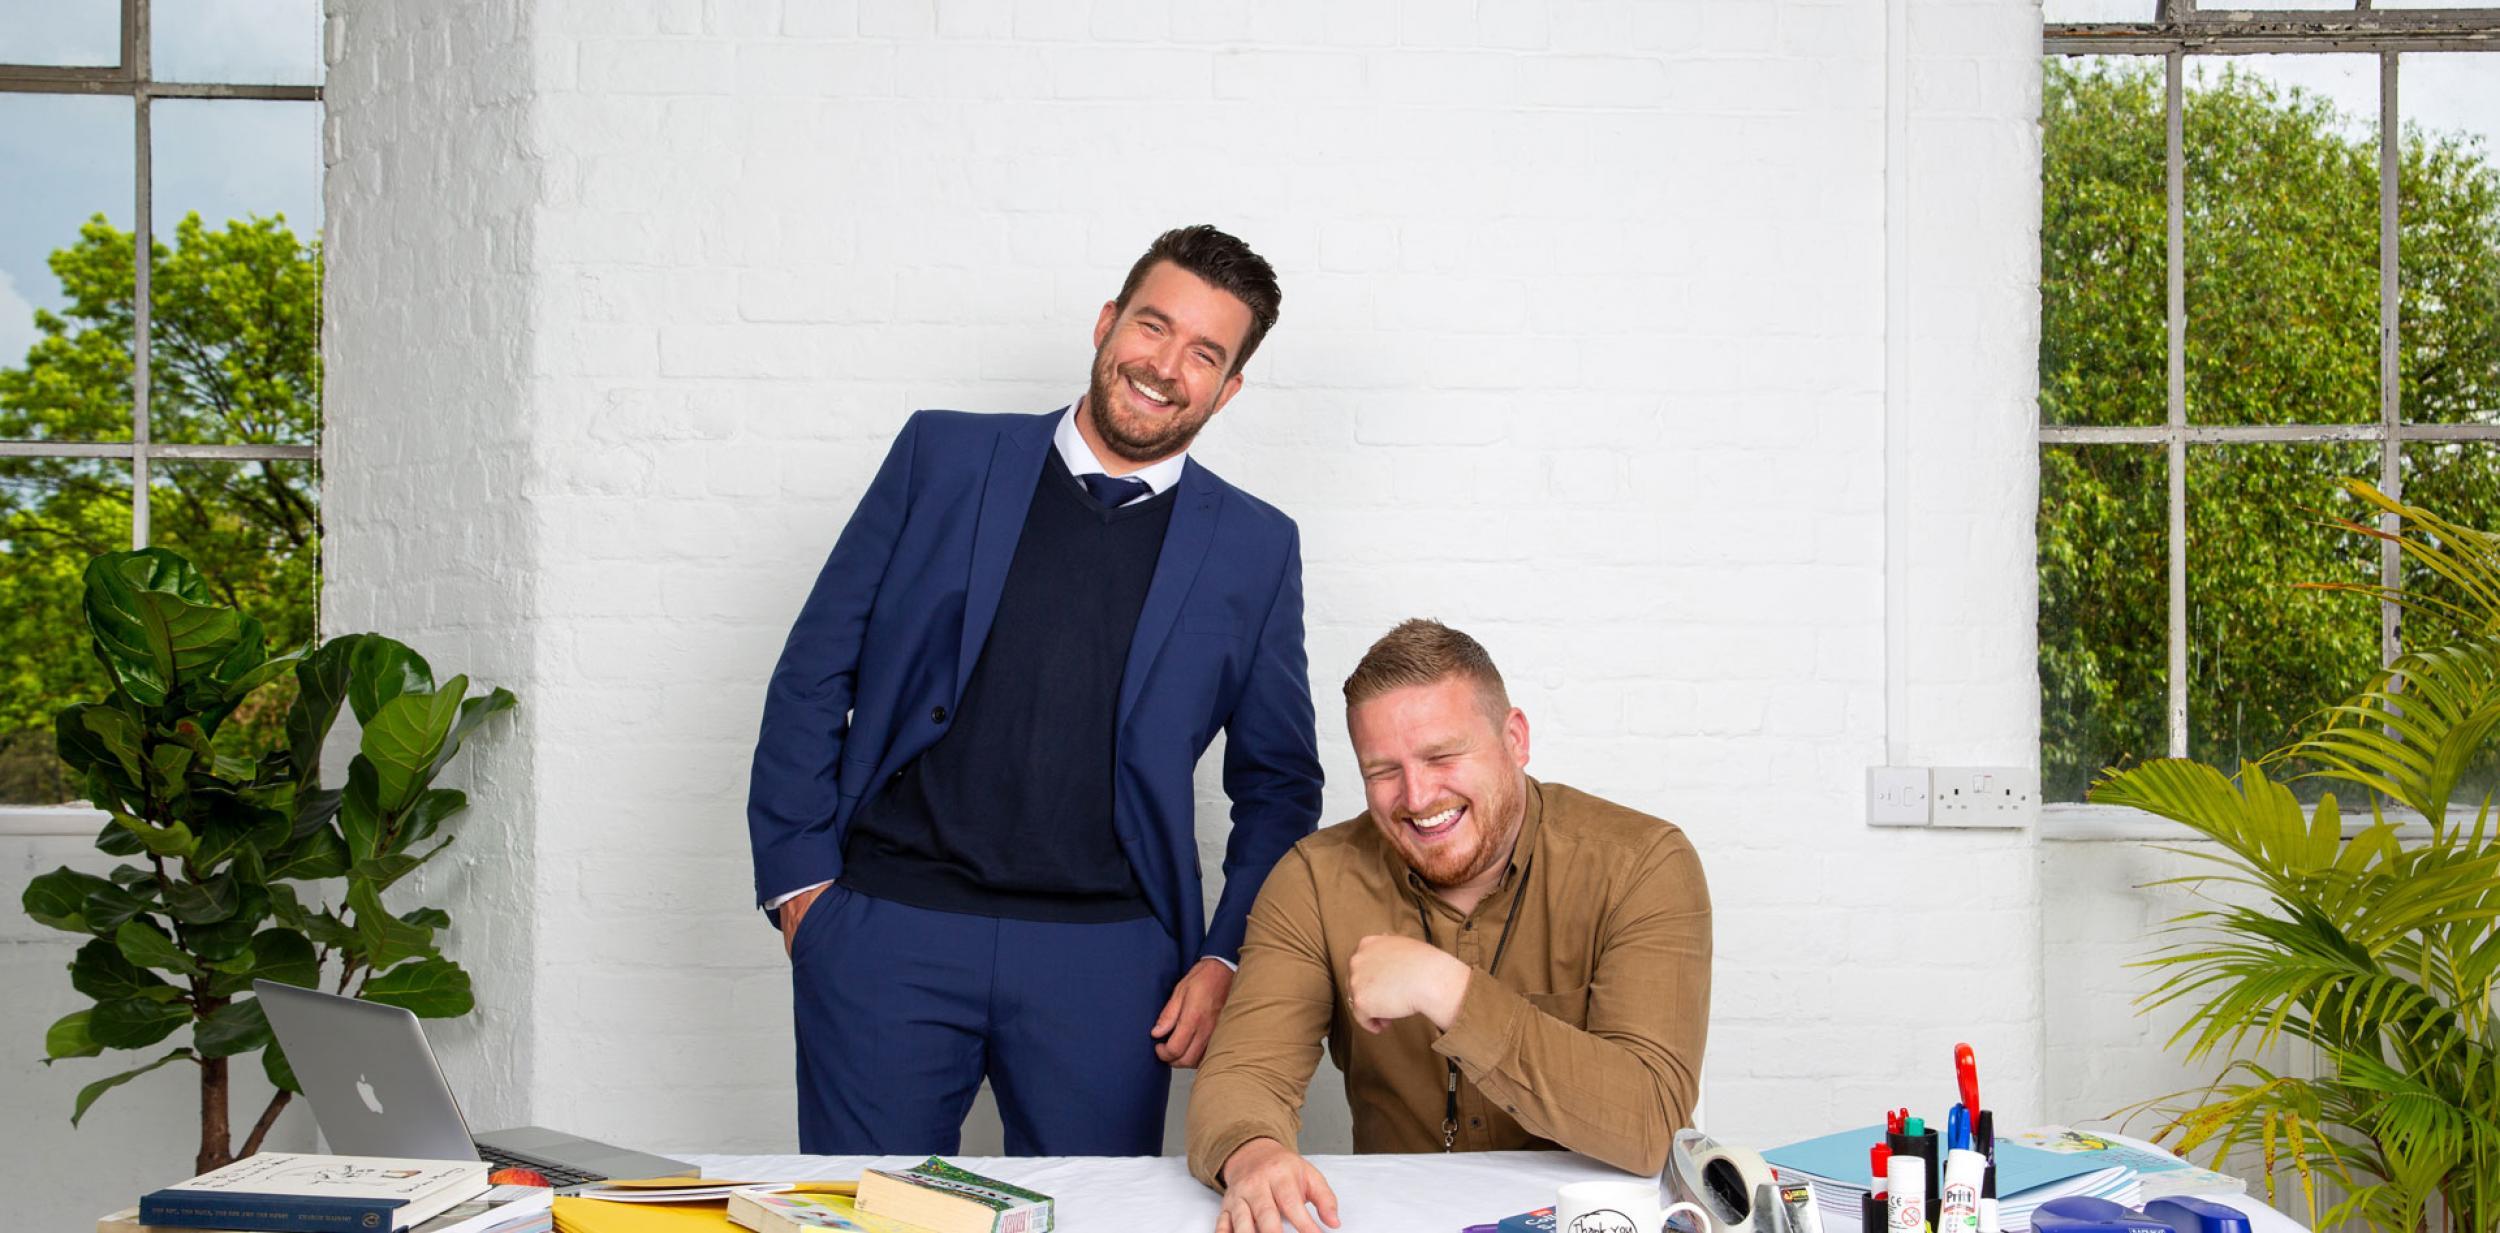 Two men at a desk, laughing.